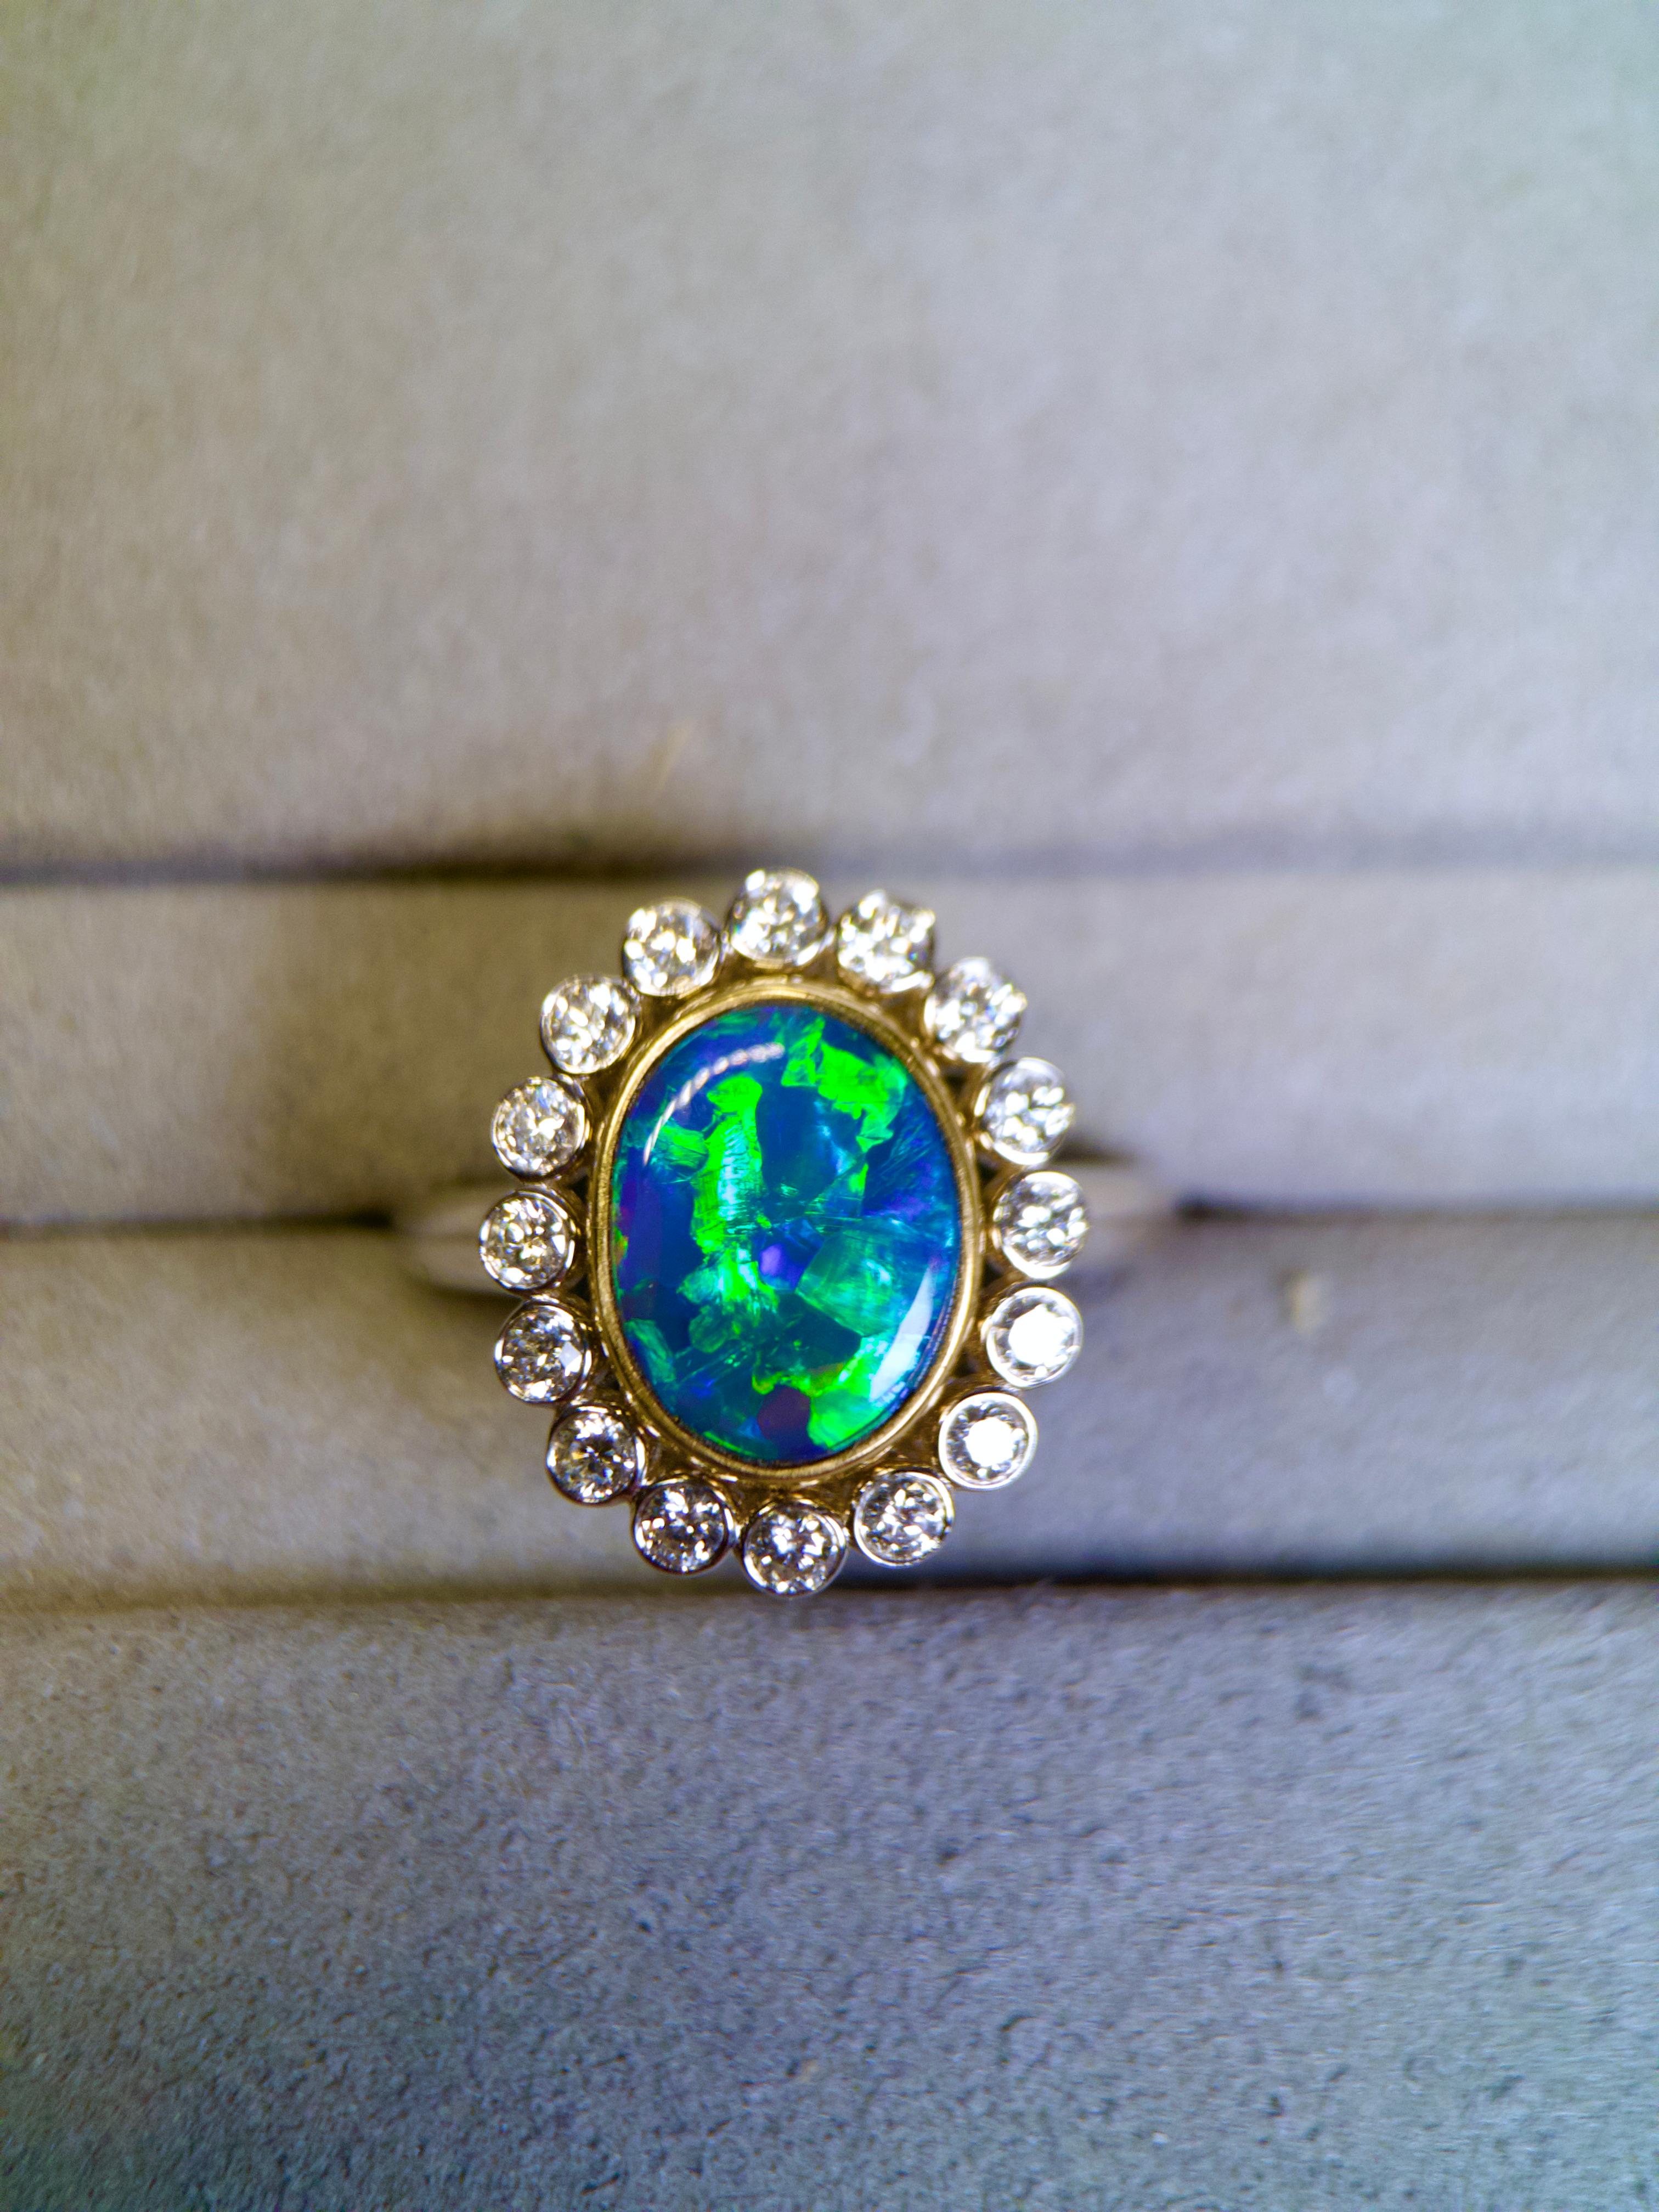 Cabochon Australian Solid Black Opal 1.935ct and Diamond Ring in 18k Gold 